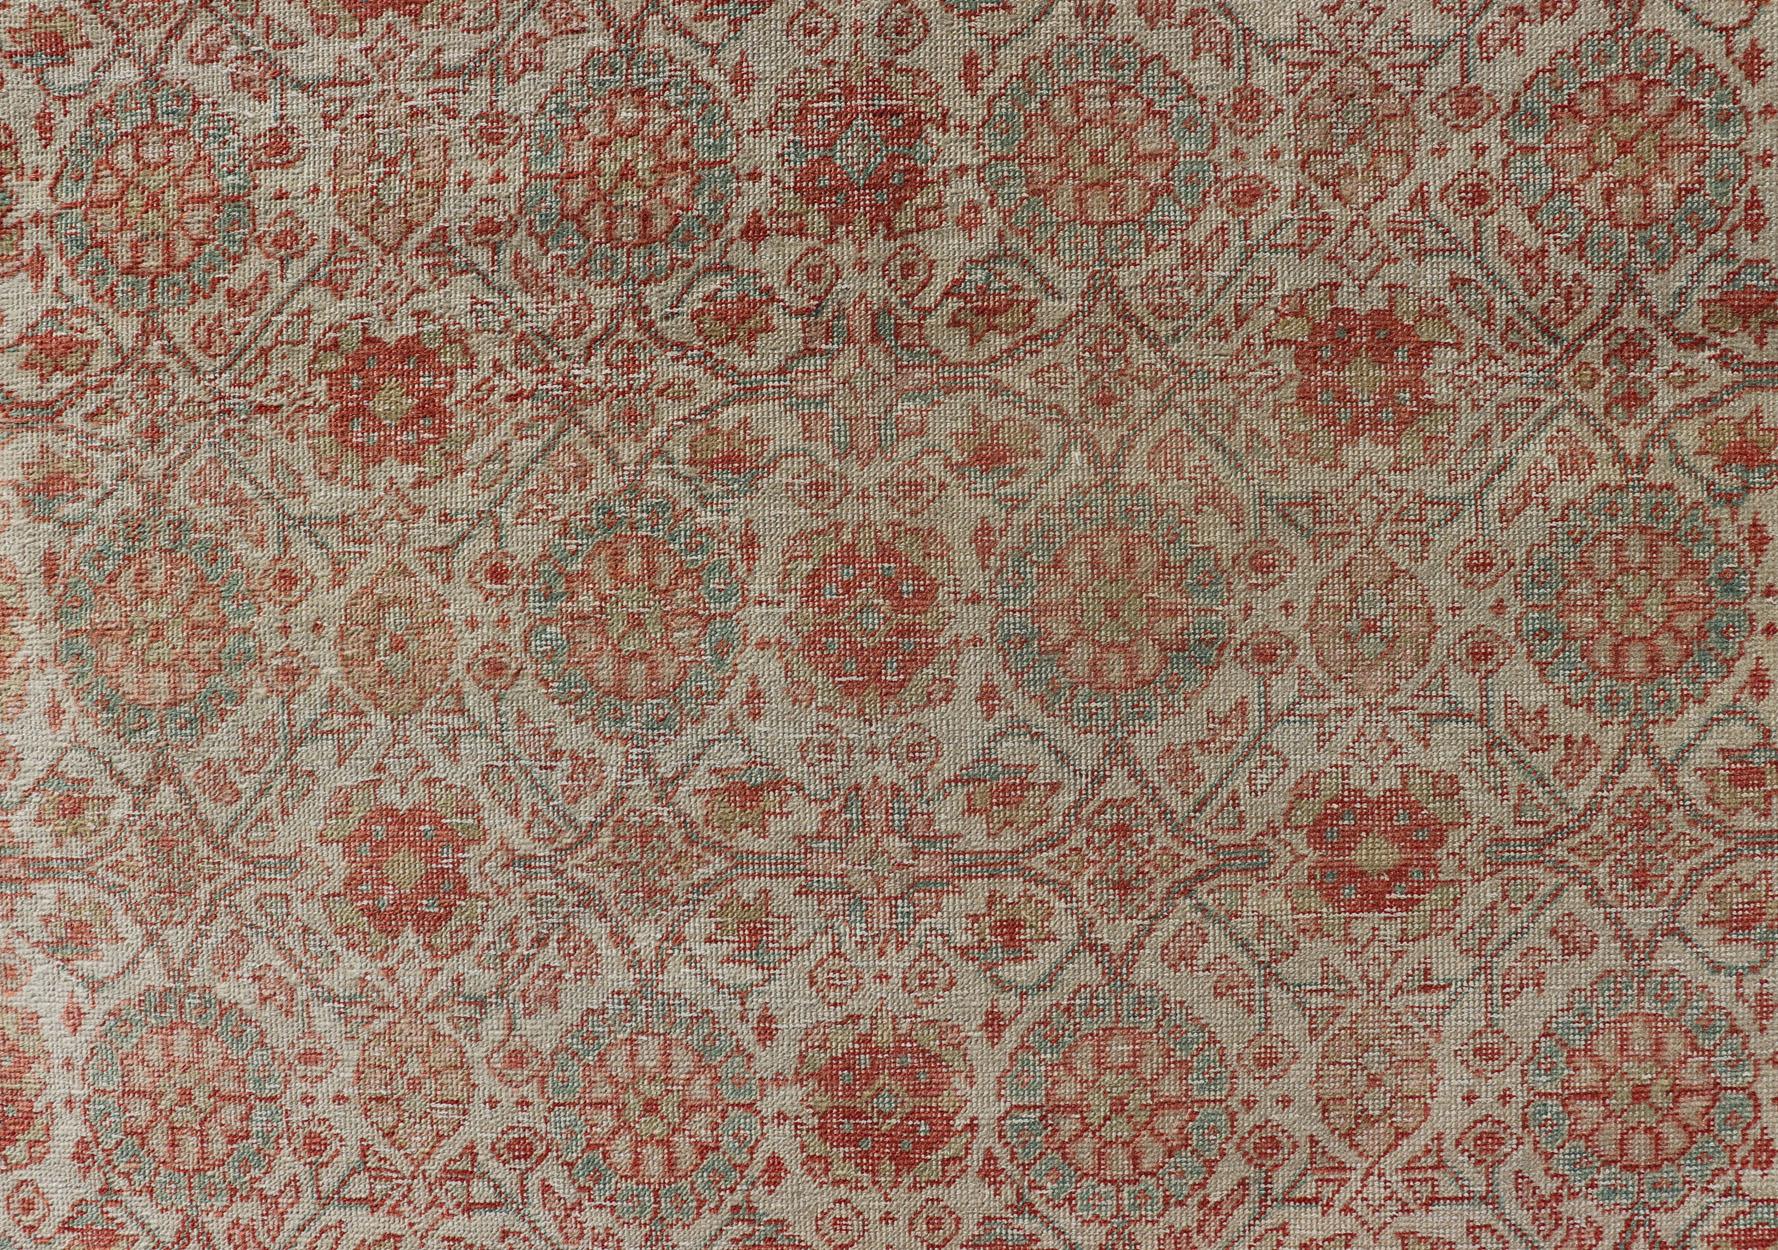 Persian Tabriz Rug with Boteh Design in Cream, Coral, Light Green/ Blue For Sale 4